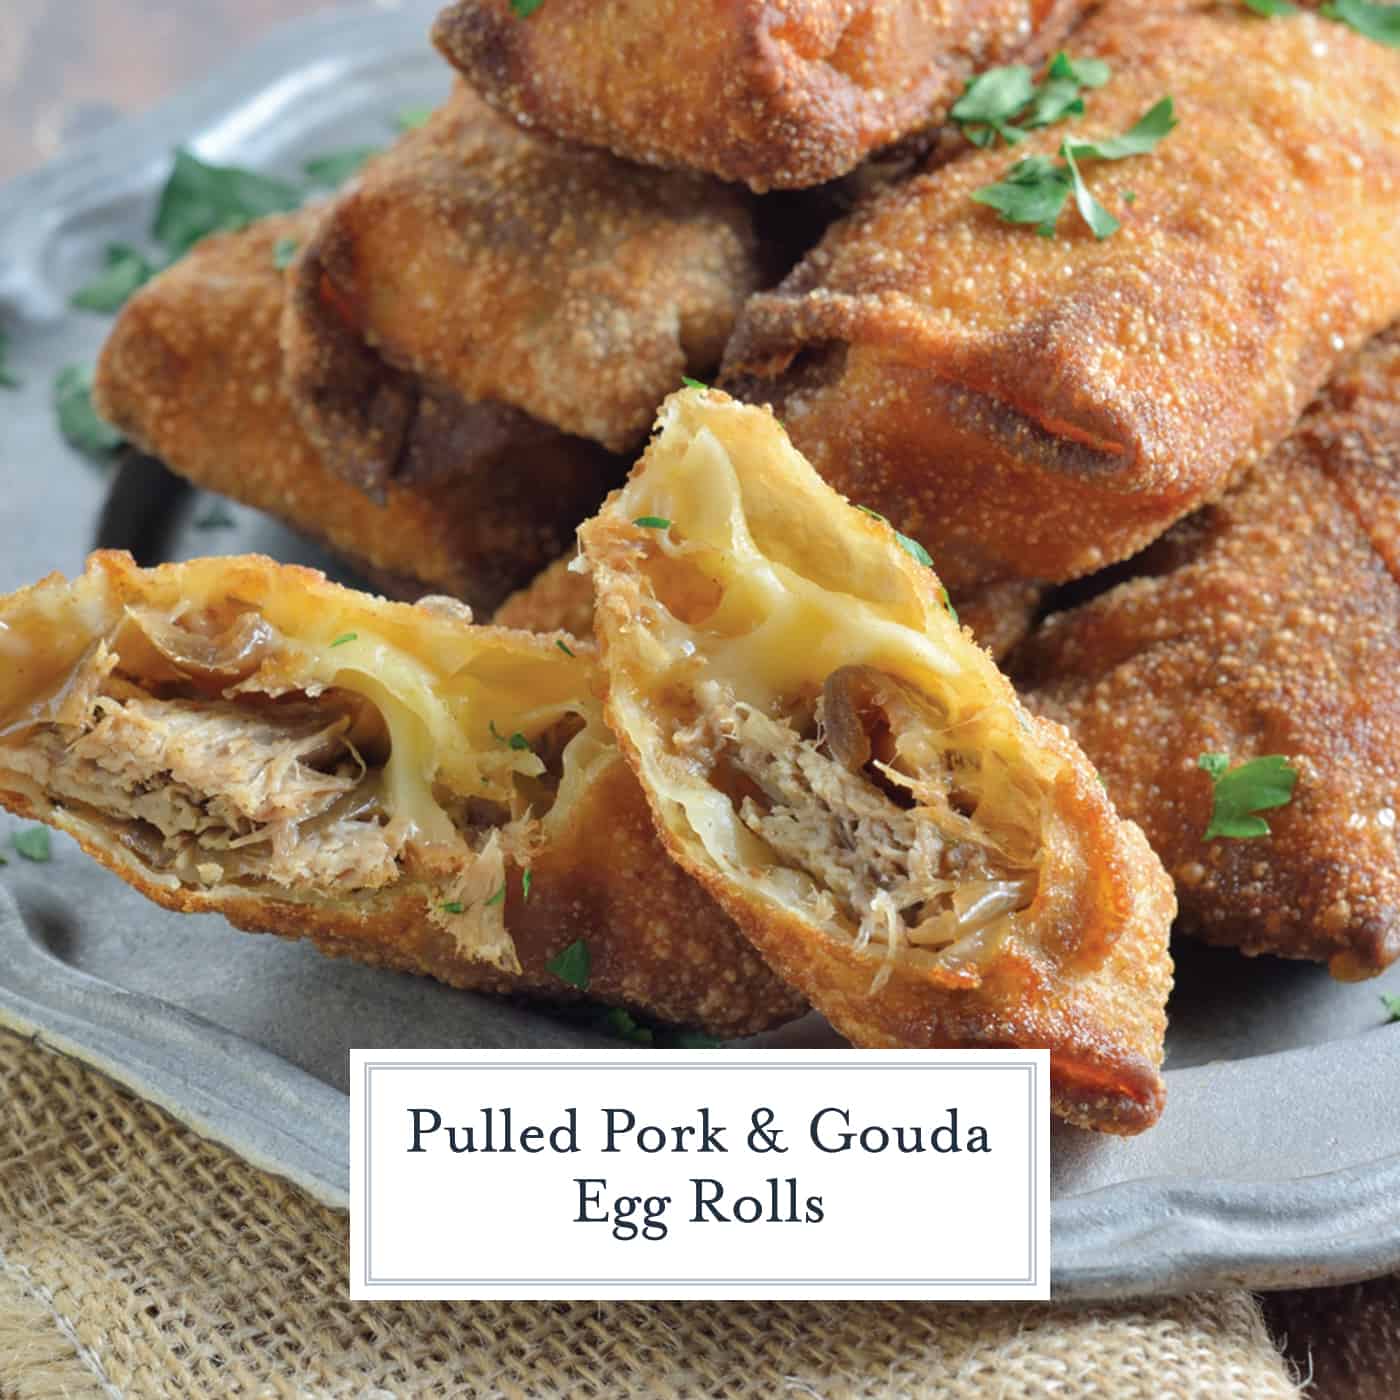 Pulled Pork and Gouda Egg Rolls are succulent, sweet and zesty pulled pork wrapped in a crispy egg roll with silky smoked gouda cheese and served alongside Avocado Green Goddess Dressing. #homemadeeggrolls www.savoryexperiments.com 